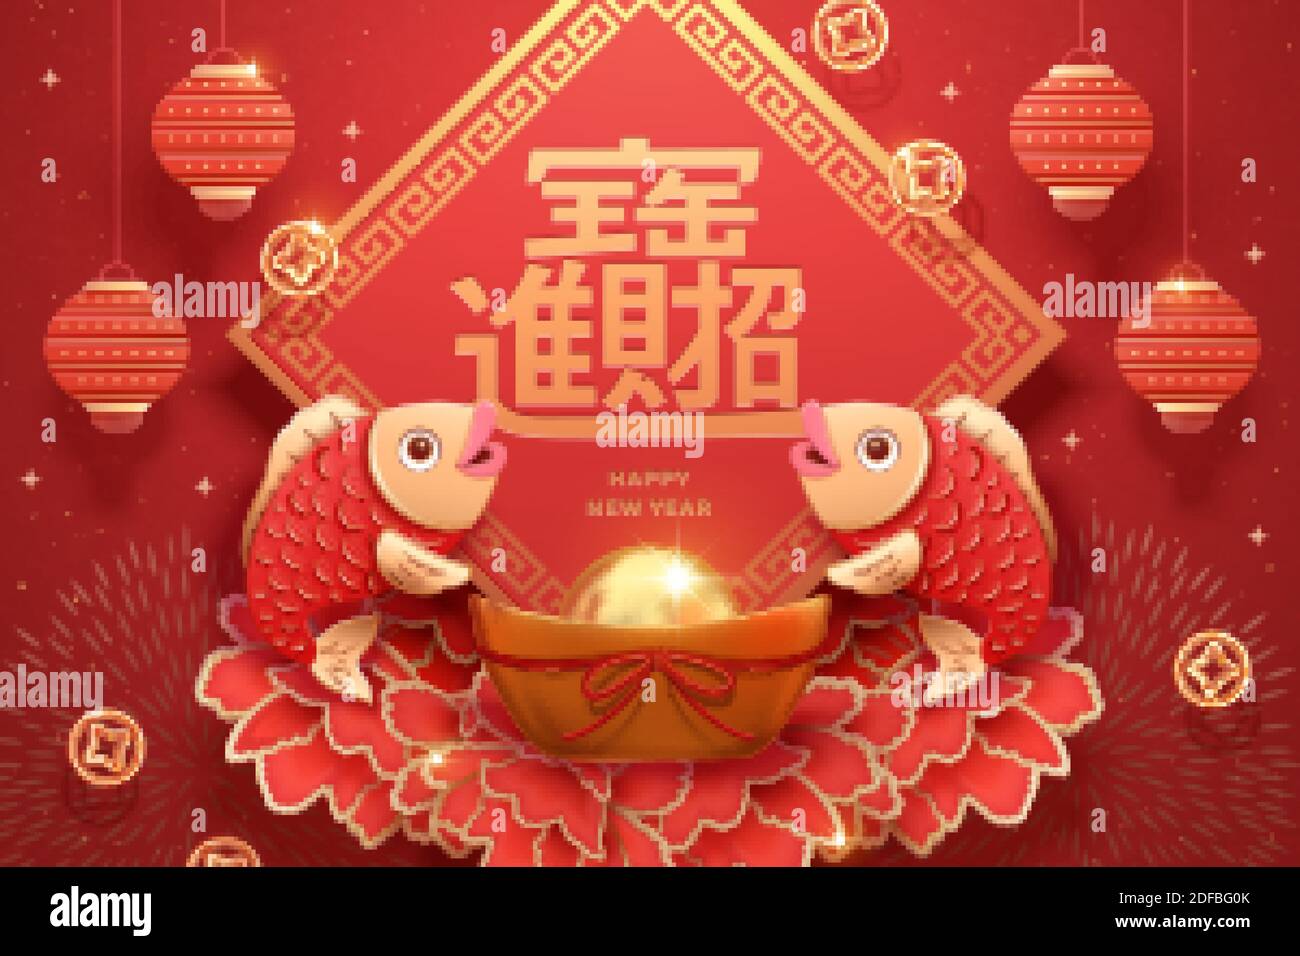 Lunar year paper art design with cute fish holding 3d illustration giant gold ingot, doufang and peony flower background, Chinese translation: Usherin Stock Vector